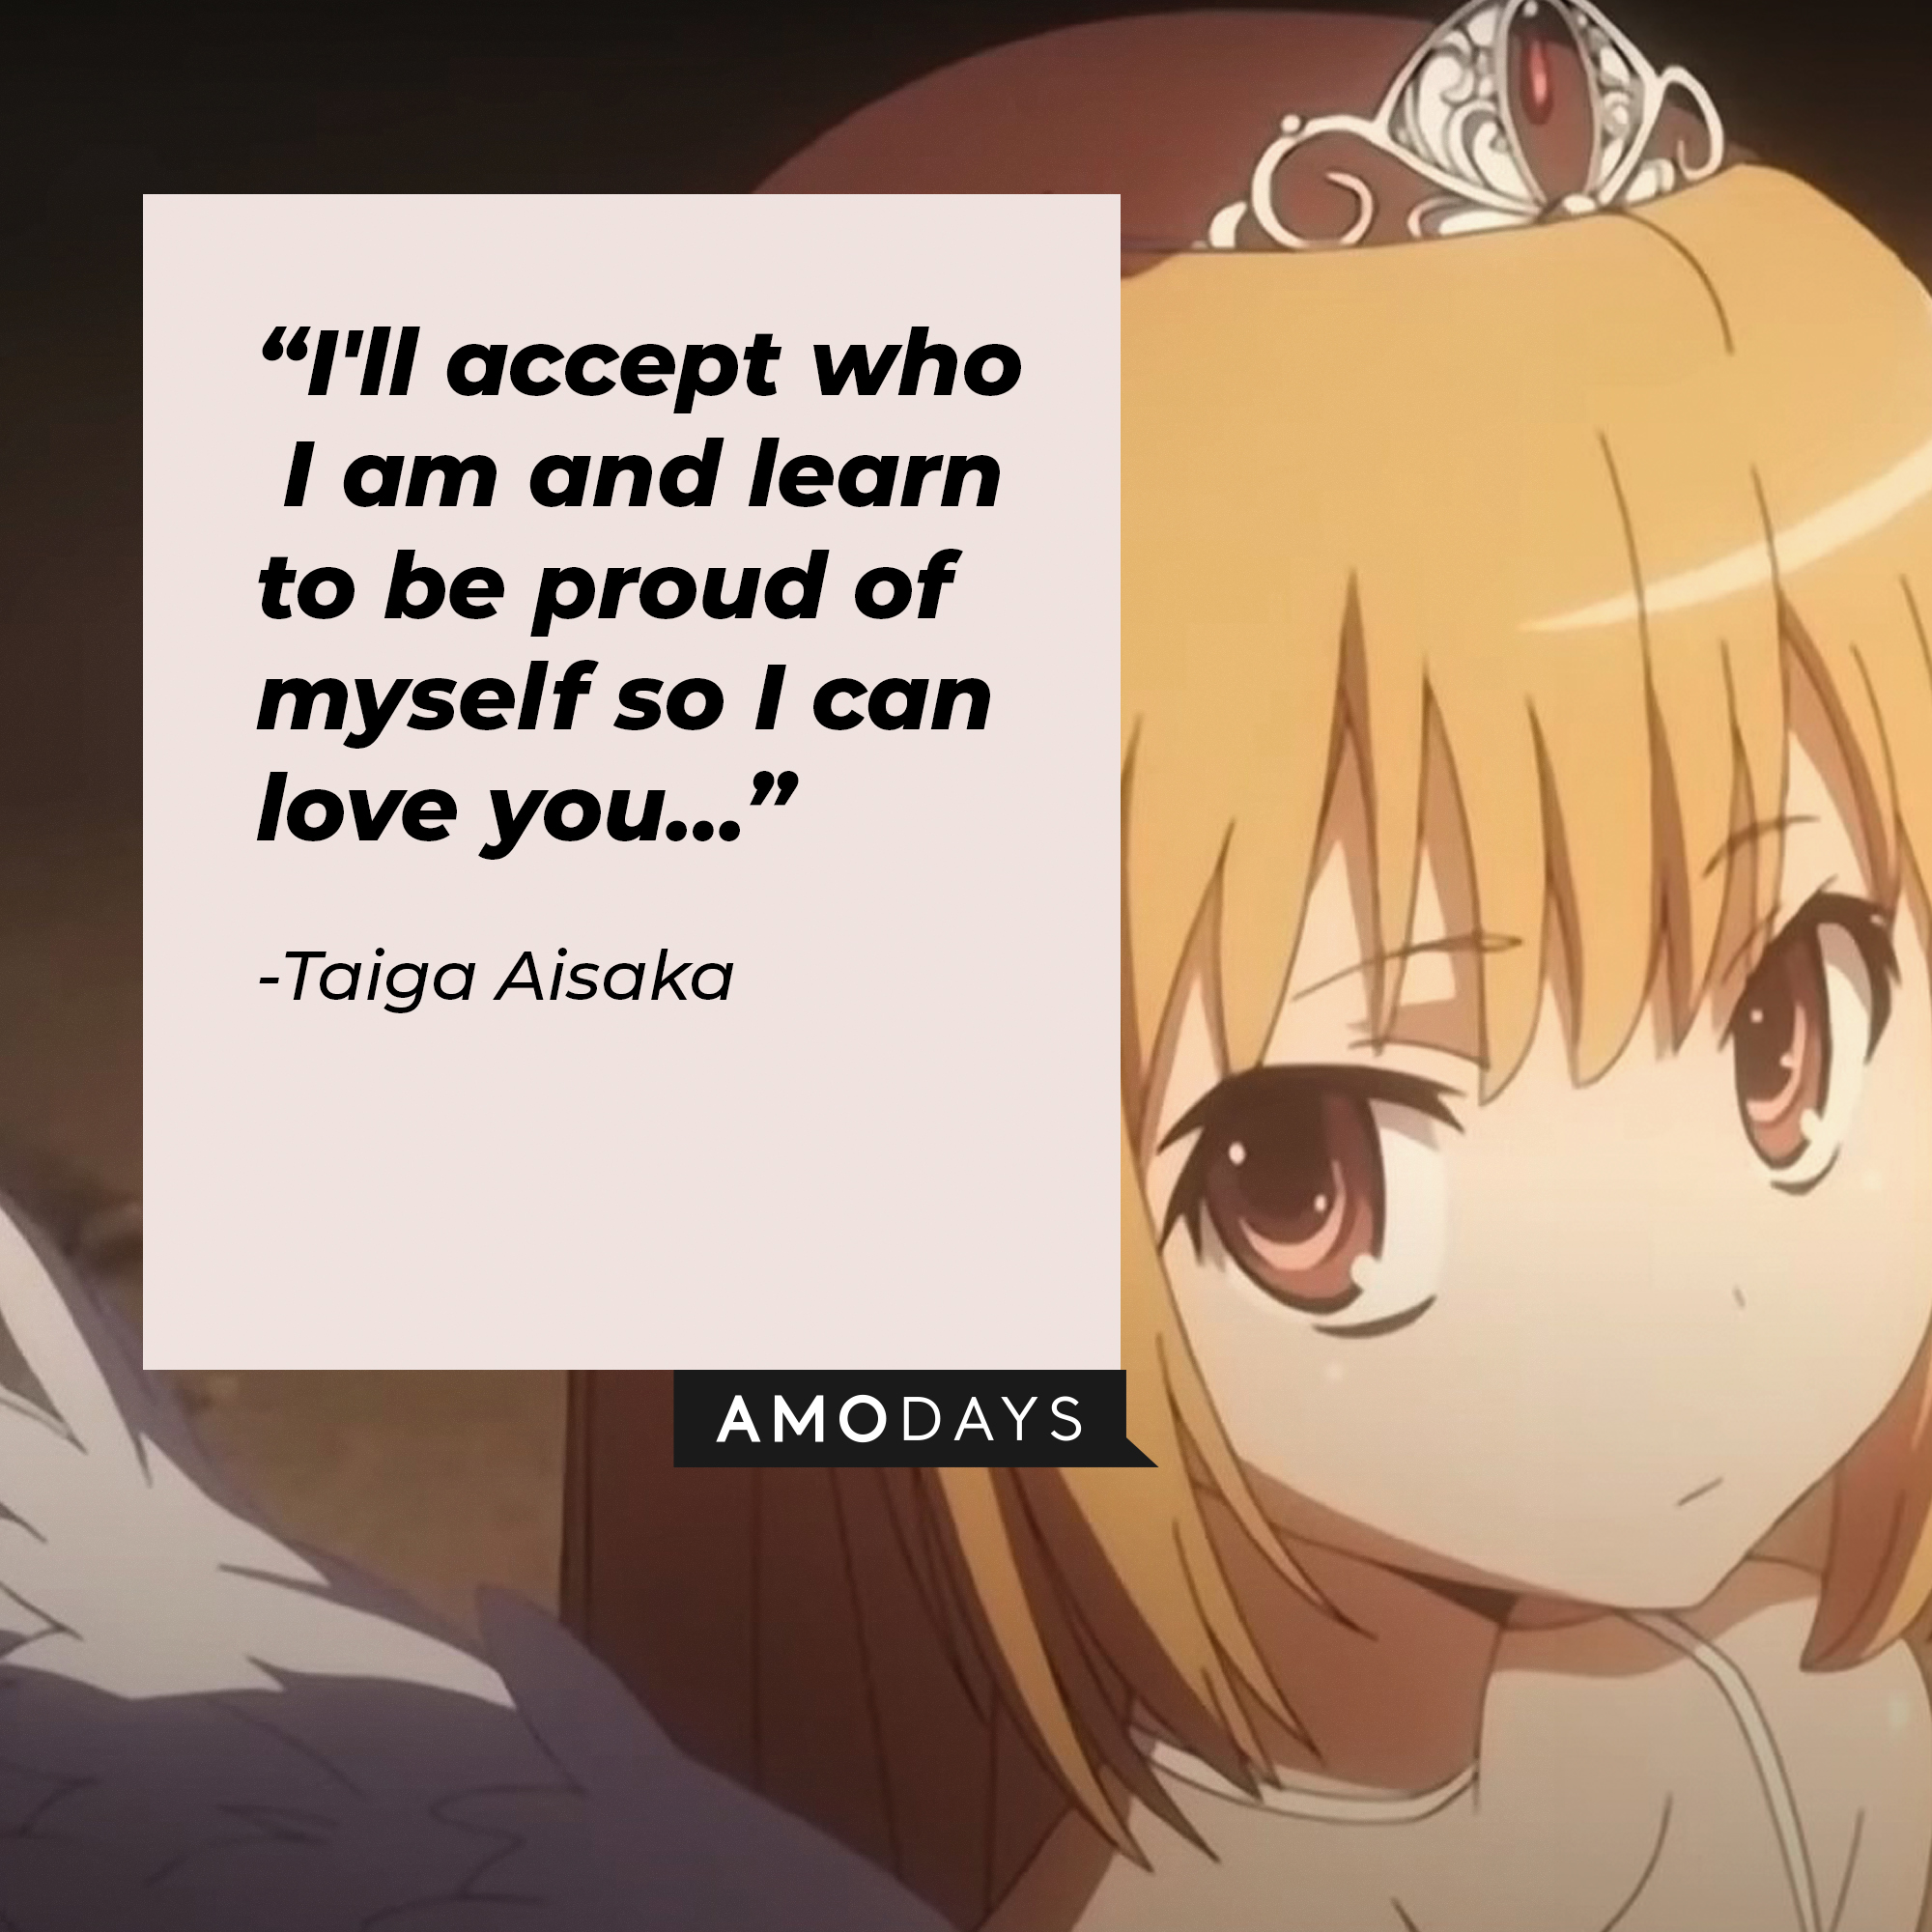 A picture of the animated character Taiga Aisaka with a quote by her: “I'll accept who I am and learn to be proud of myself so I can love you…” | Image: facebook.com/toradoraoff